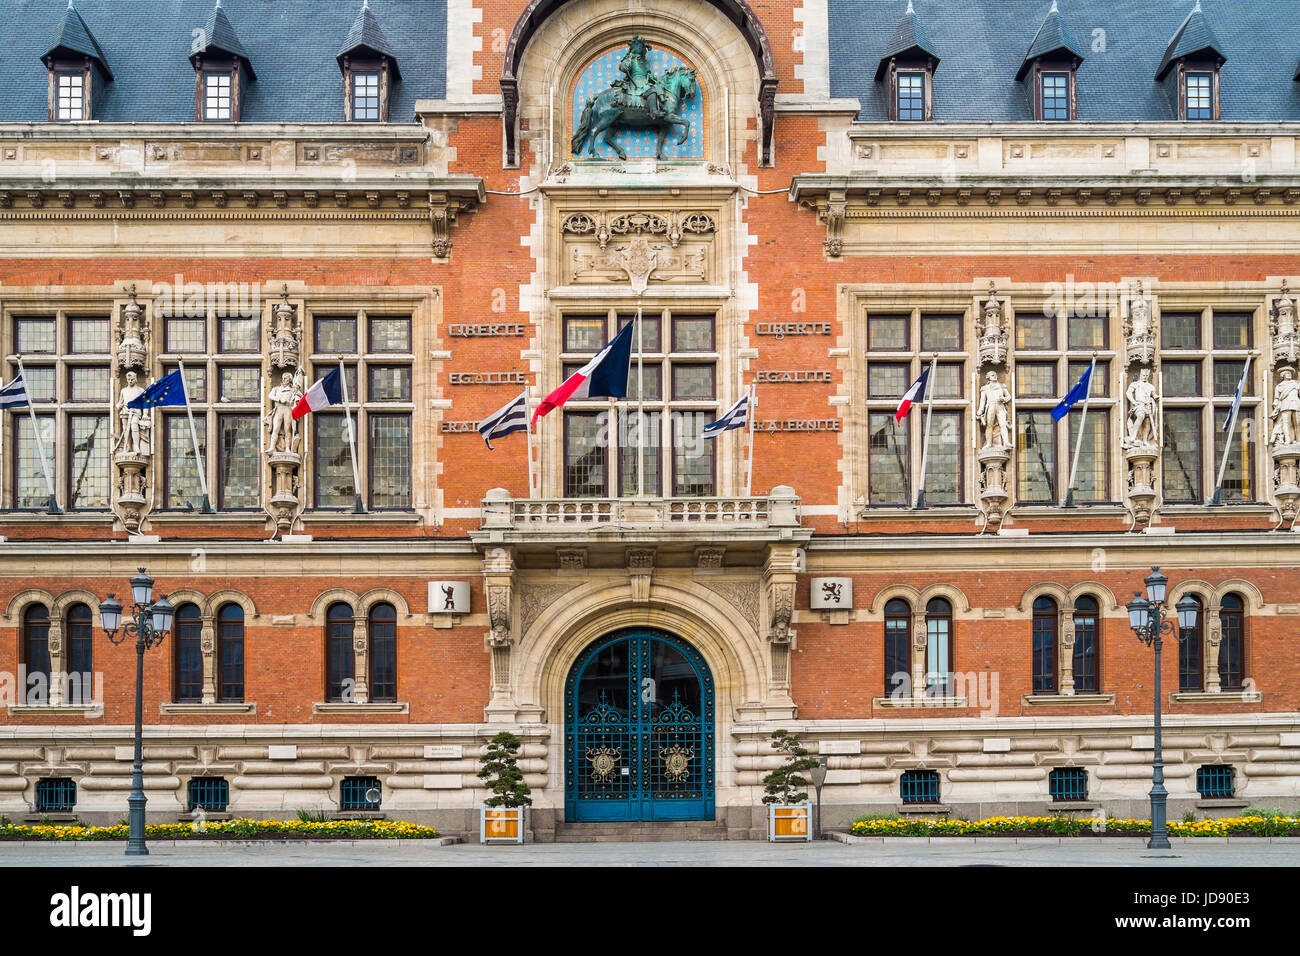 Architecture detail of Municipality of Dunkerque, France Stock Photo